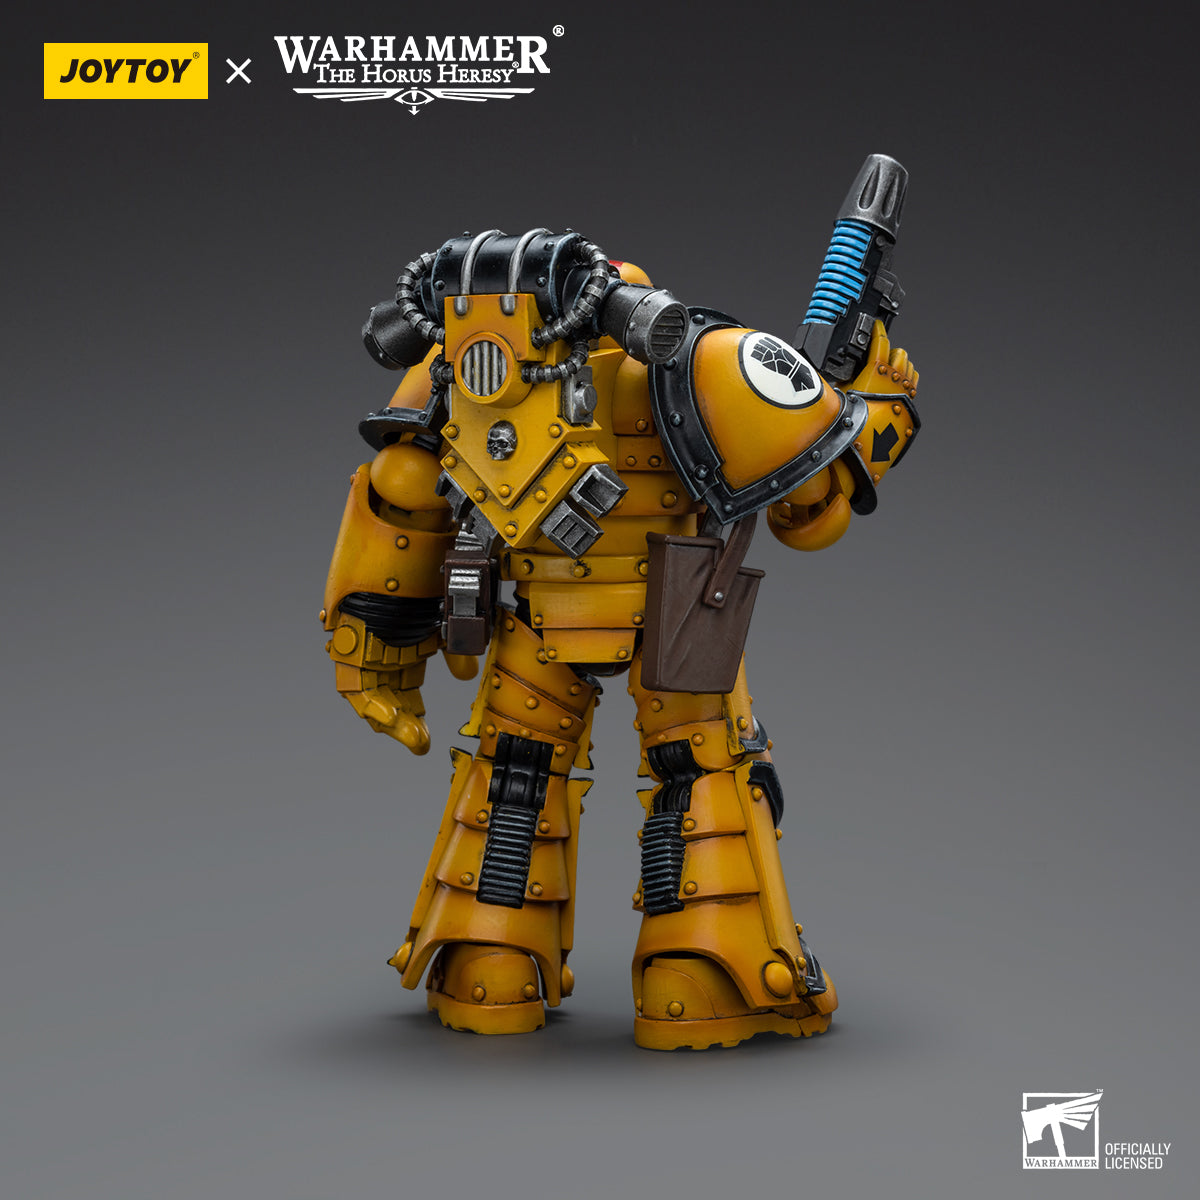 Warhammer Collectibles: 1/18 Scale Imperial Fists Legion MkIII Tactical Squad Sergeant with Pwr Fist